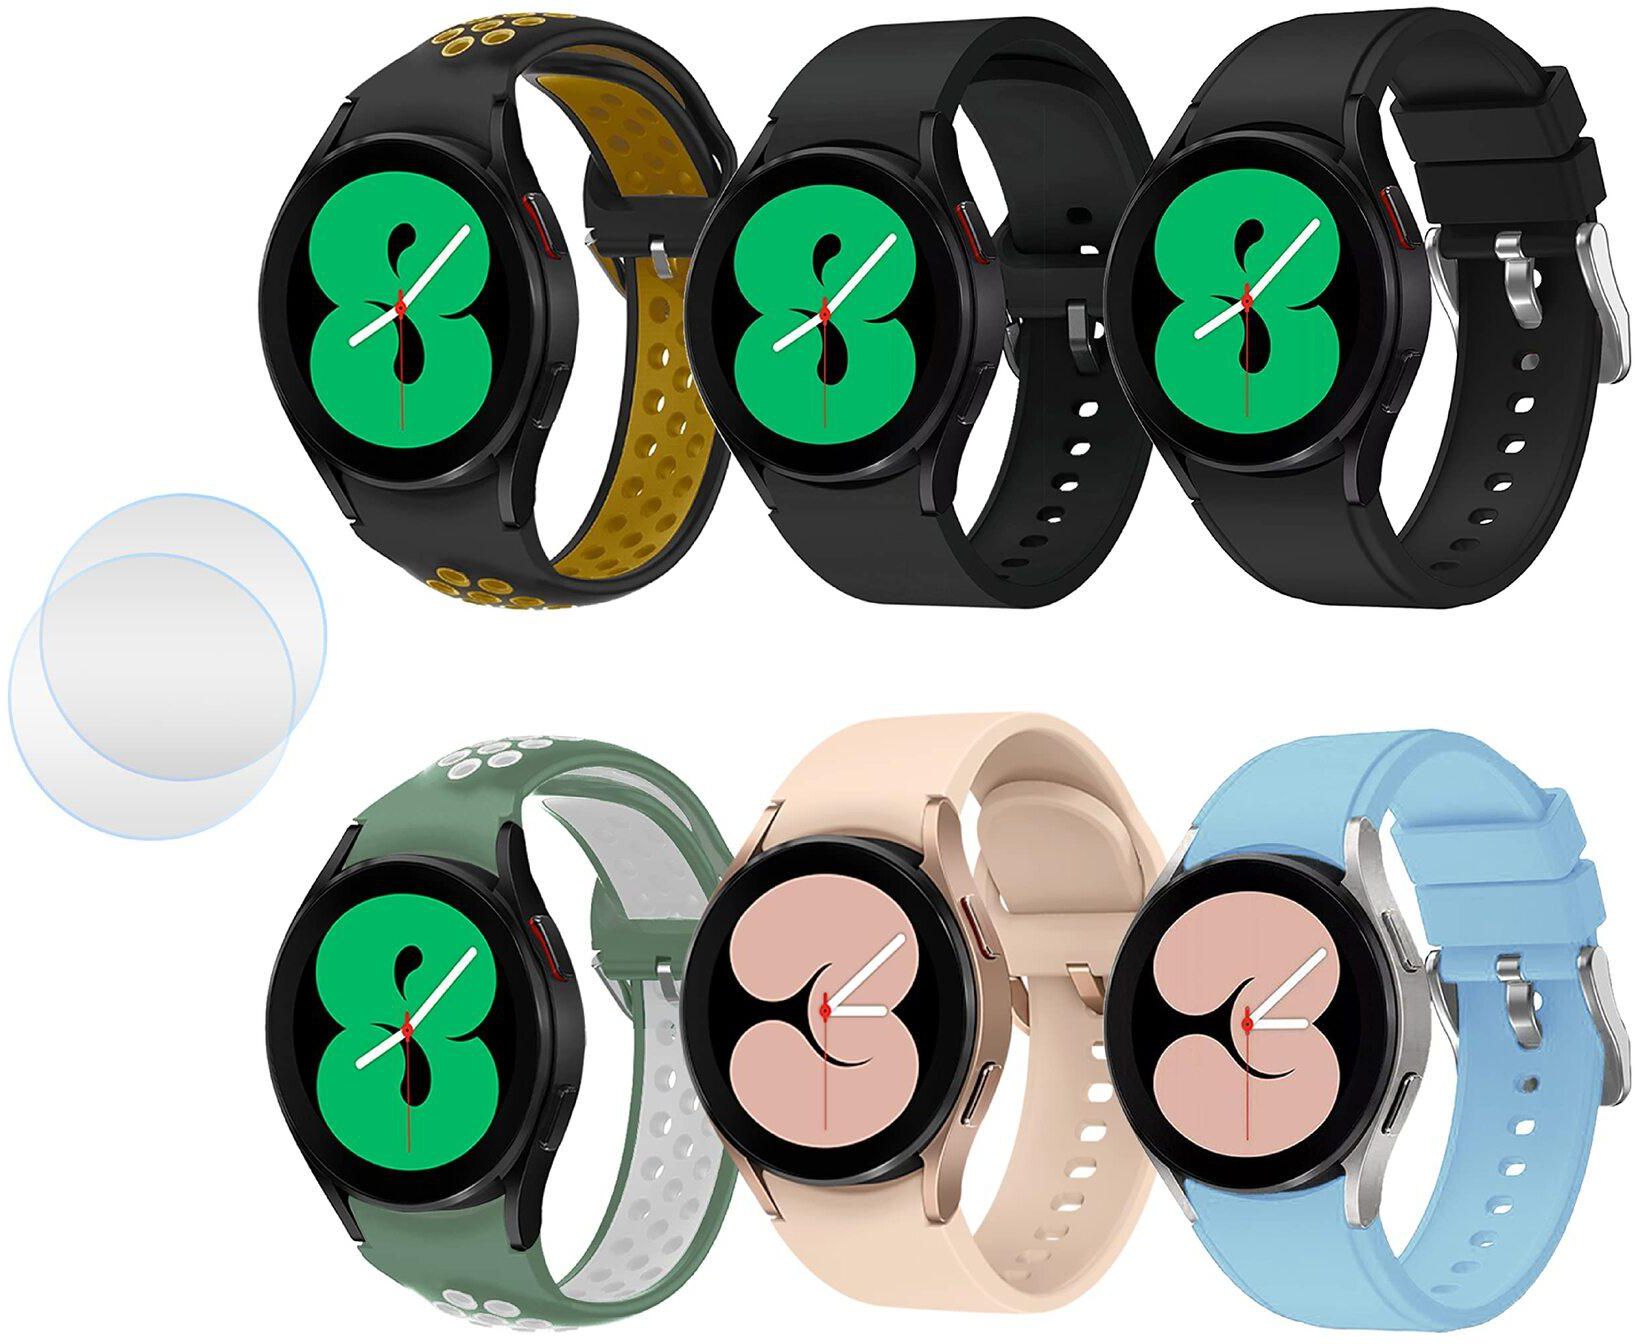 Moxedo Optimum Bundle Pack of 8, Multi-Color Silicone Replacement Strap Band with 44mm Screen Protector Compatible For Samsung Galaxy Watch 4 (C2)